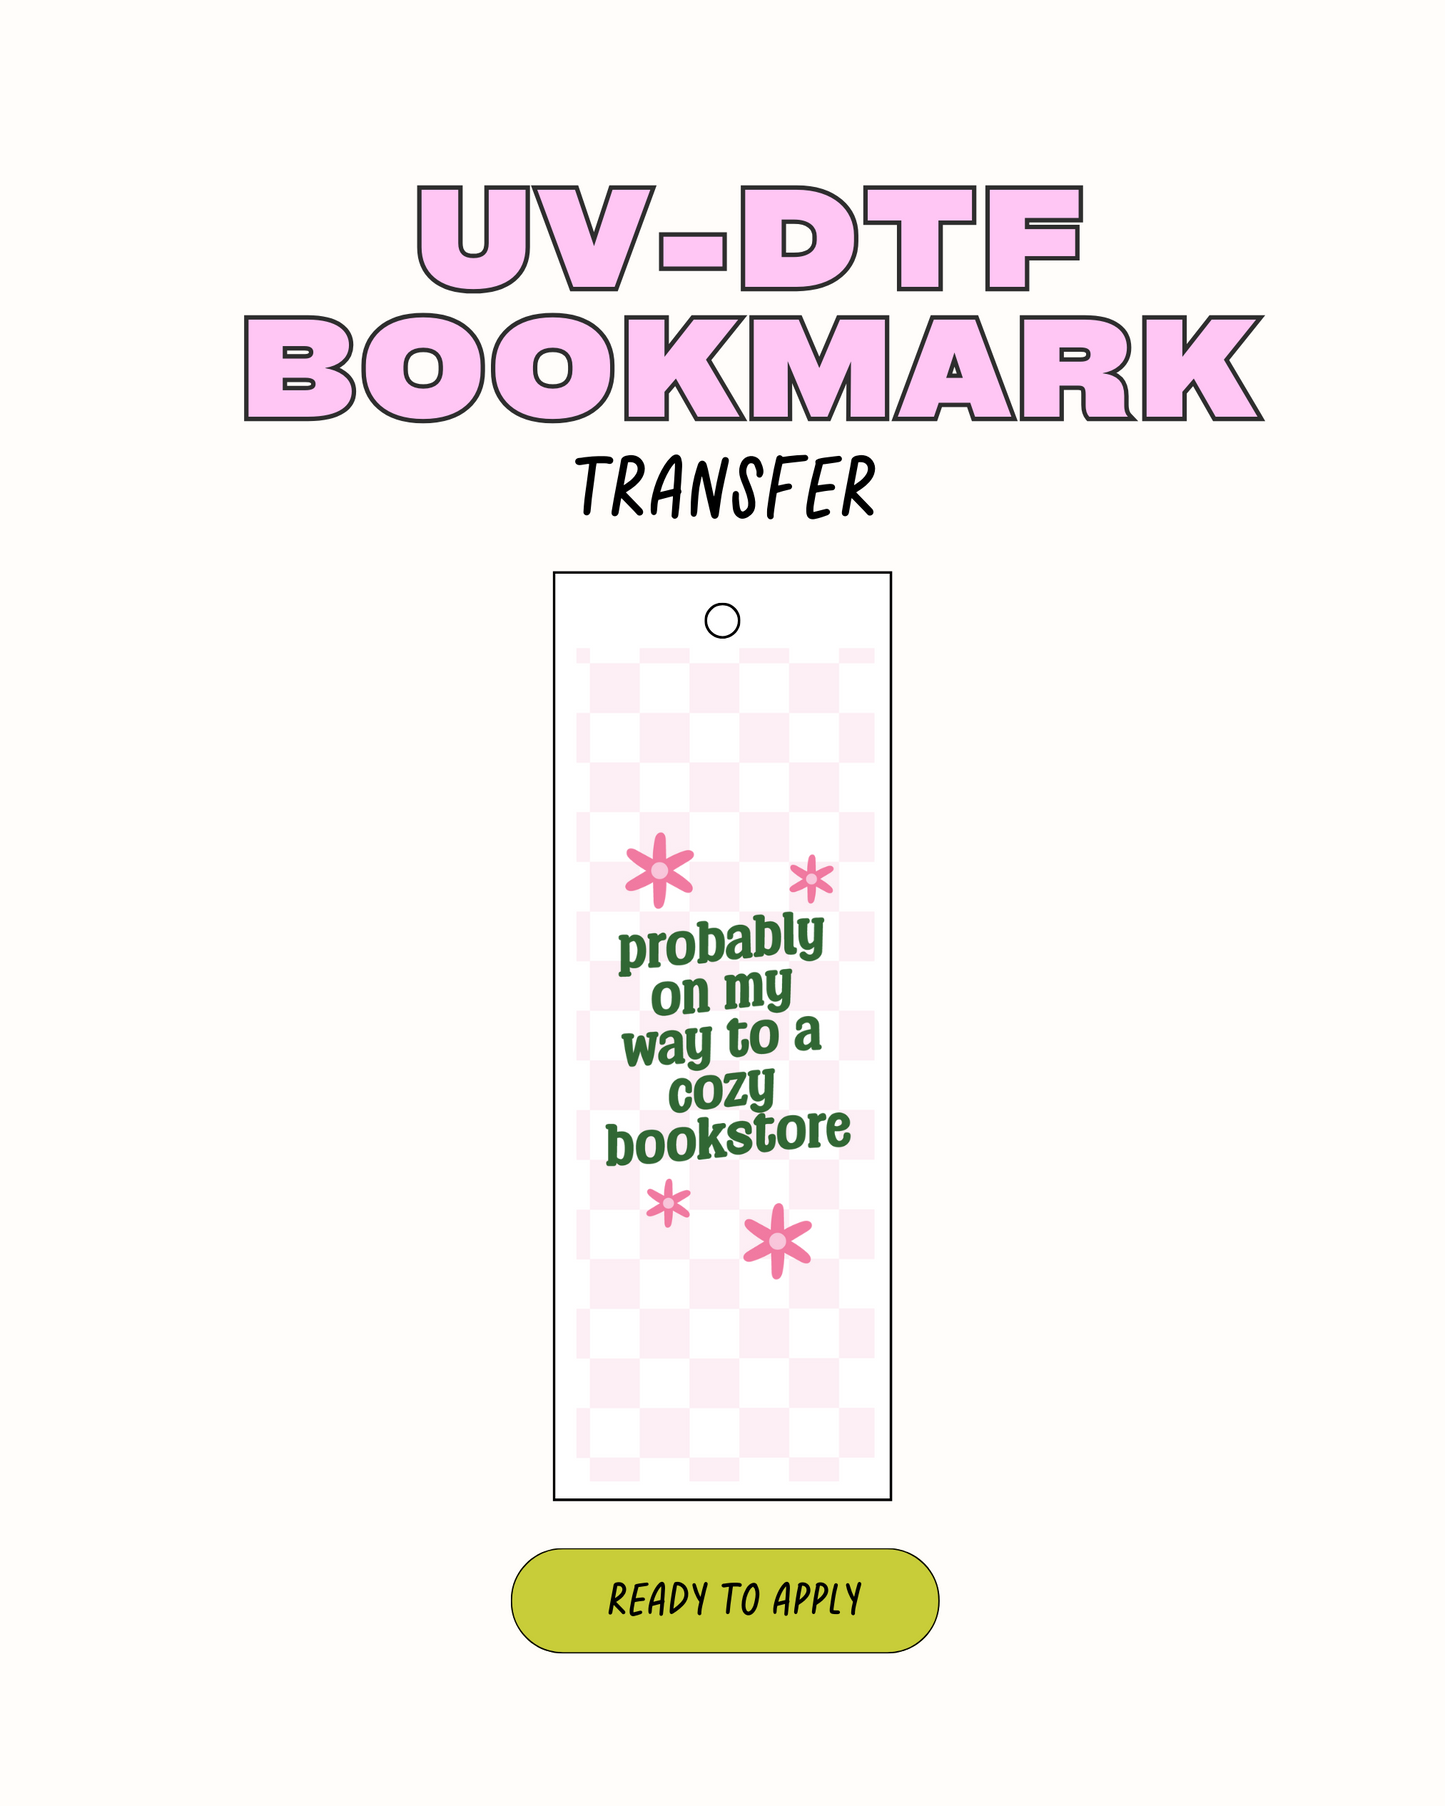 On my way to a bookstore - UVDTF Bookmark Decal